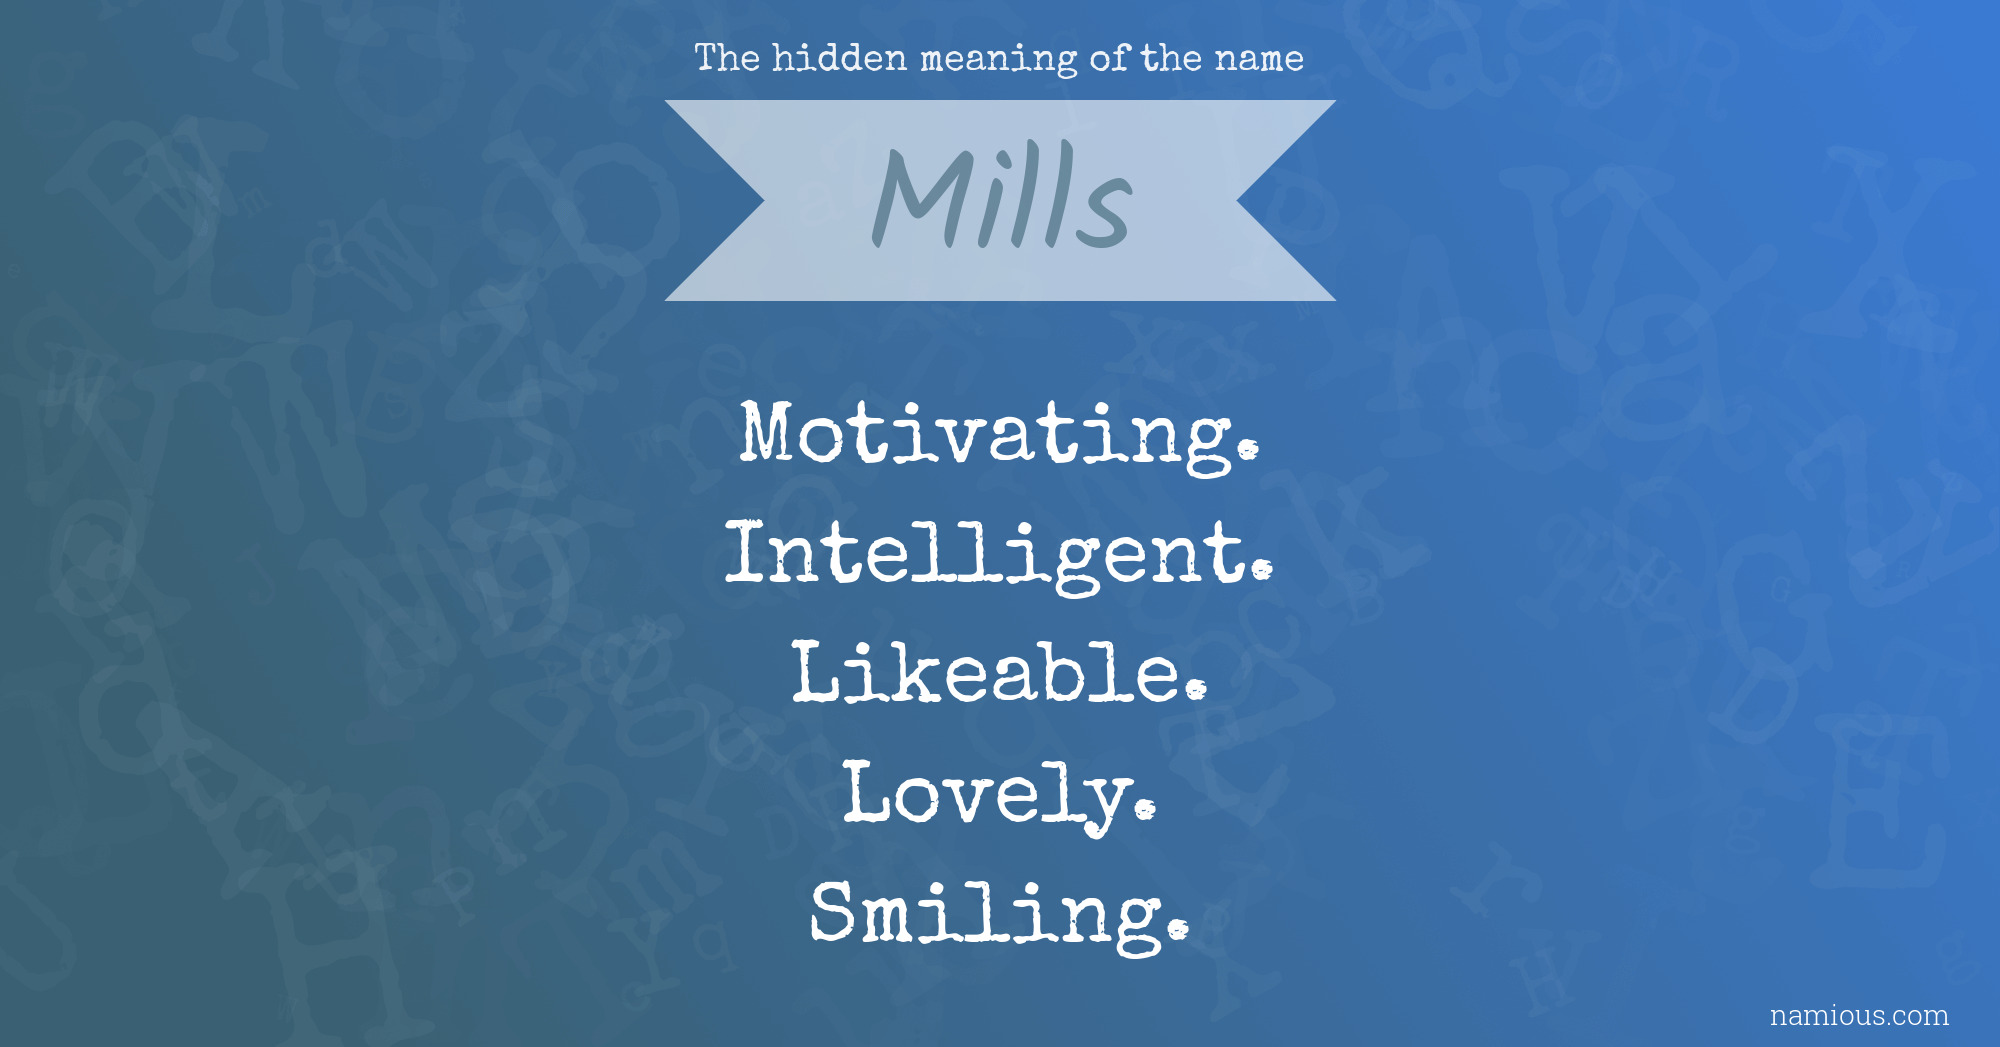 The hidden meaning of the name Mills